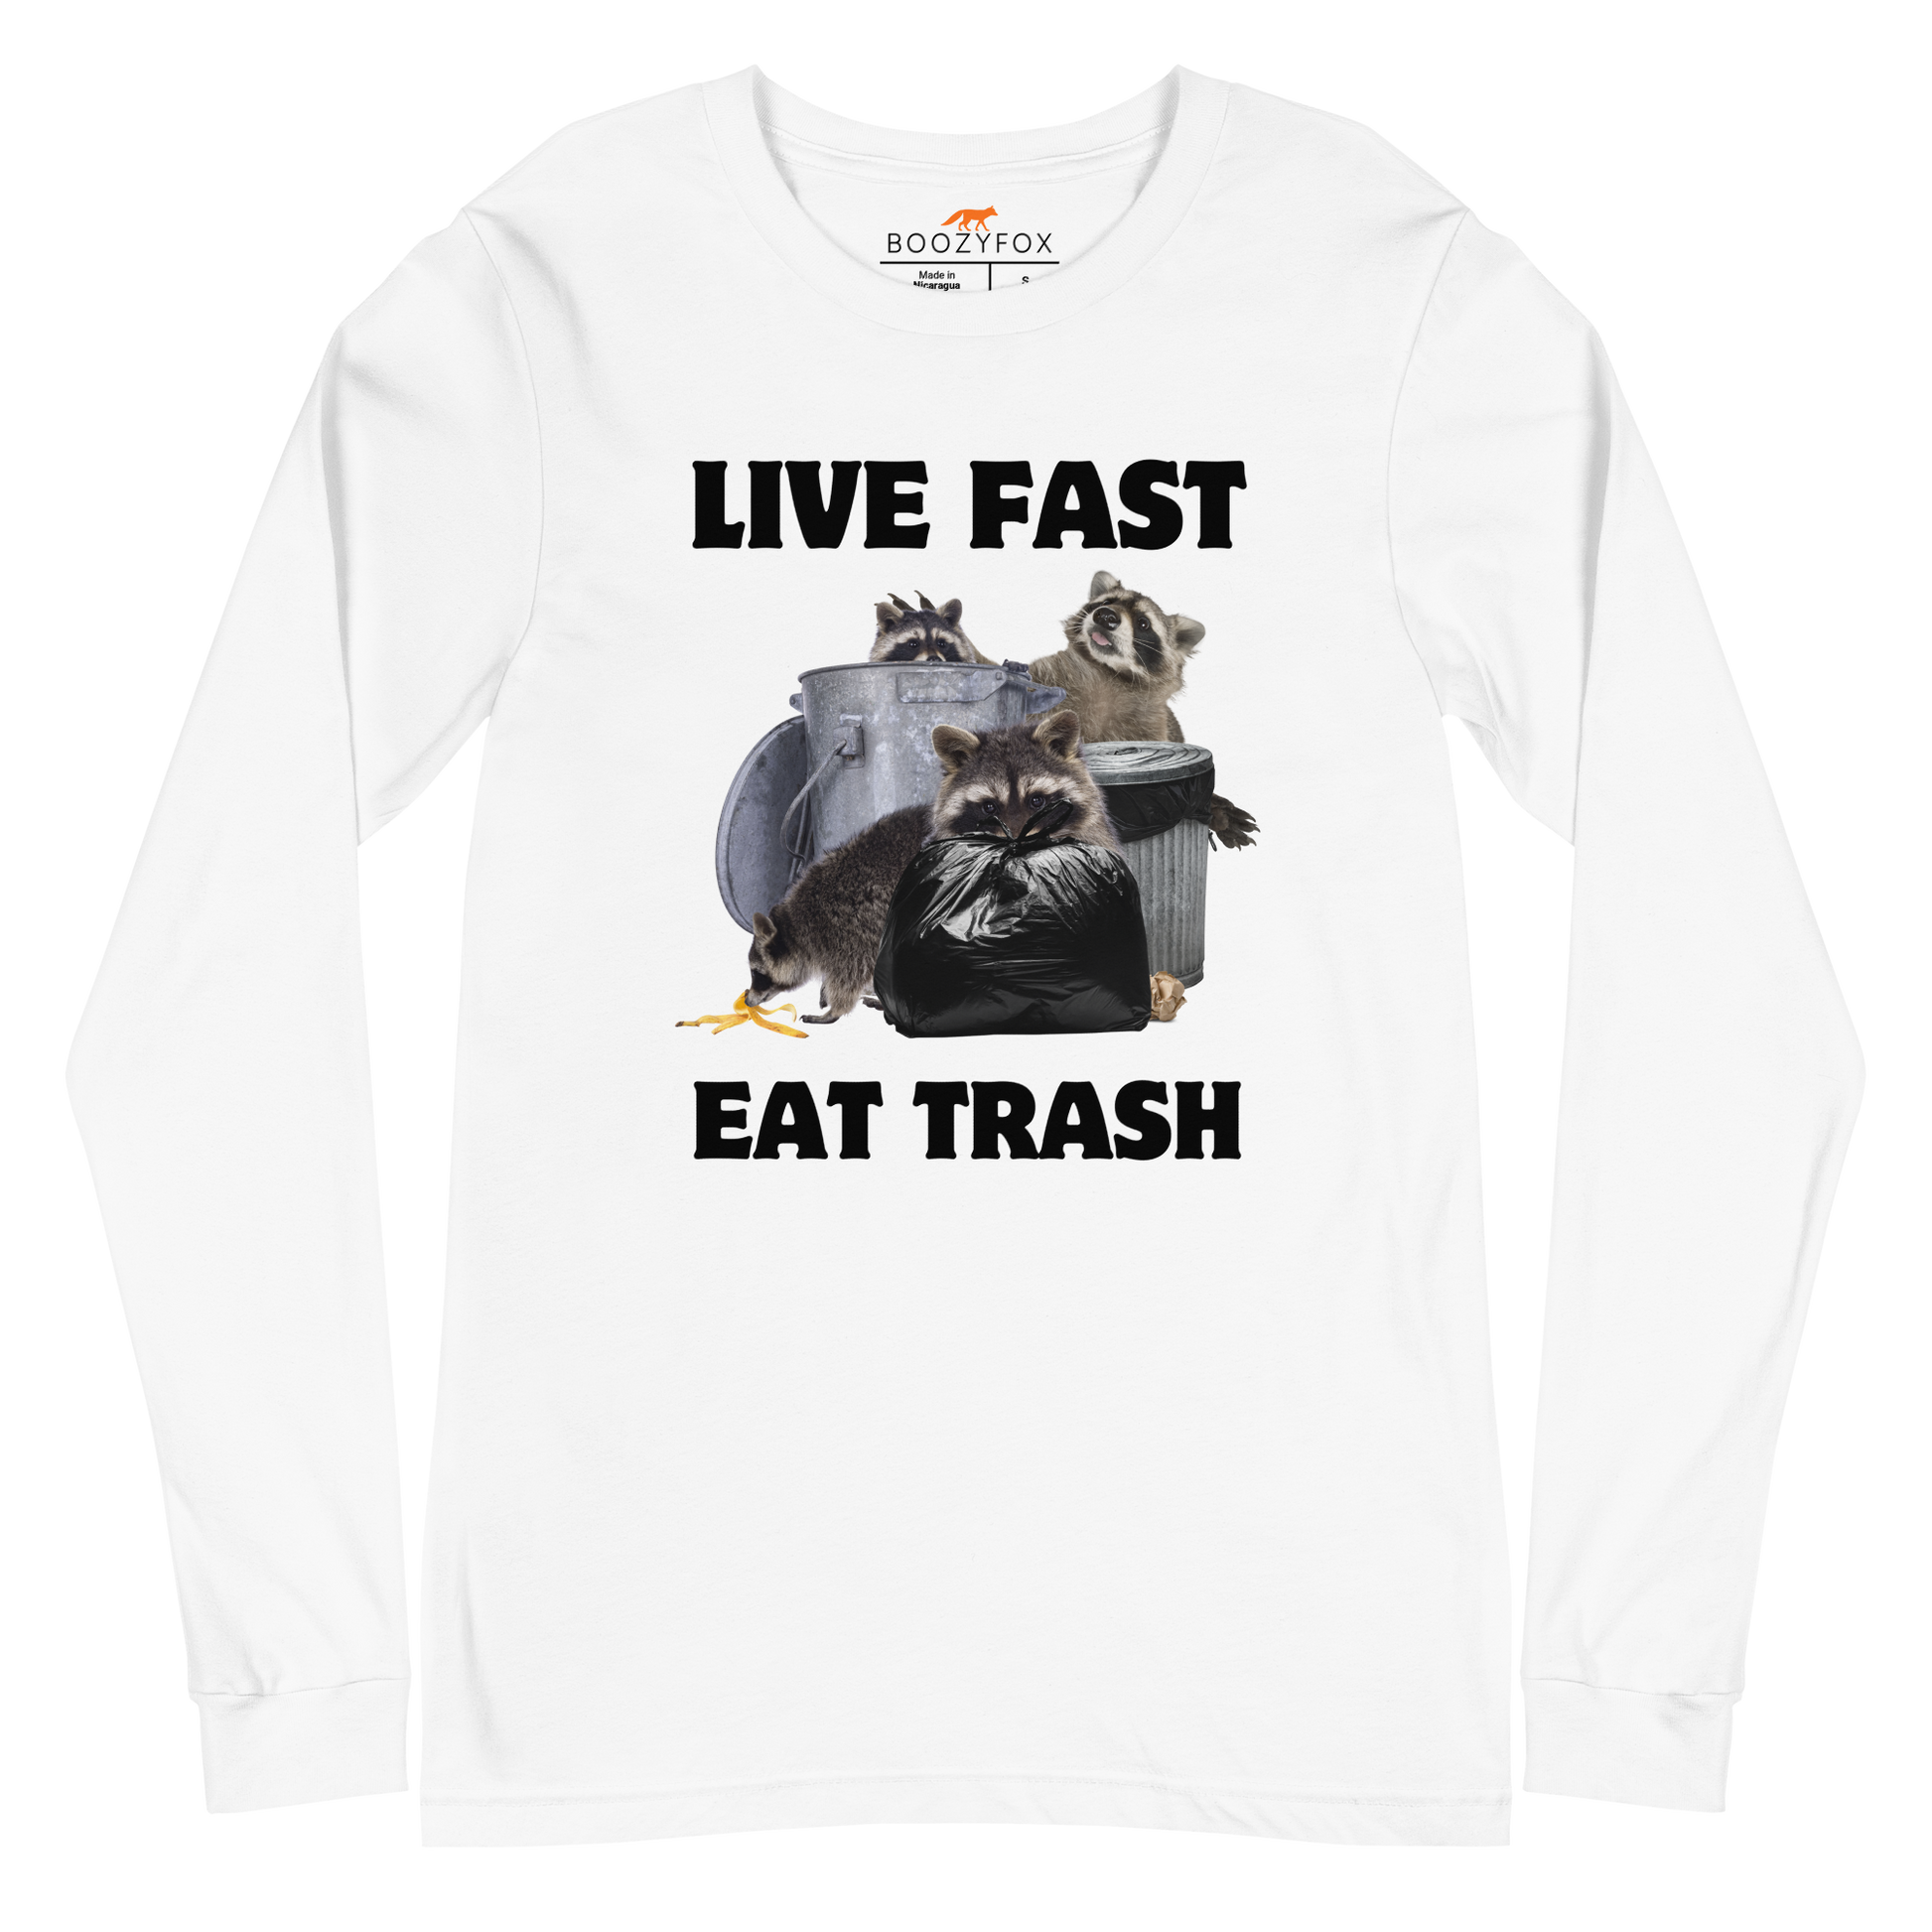 White Raccoon Long Sleeve Tee featuring a funny Live Fast Eat Trash graphic on the chest - Funny Raccoon Long Sleeve Graphic Tees - Boozy Fox